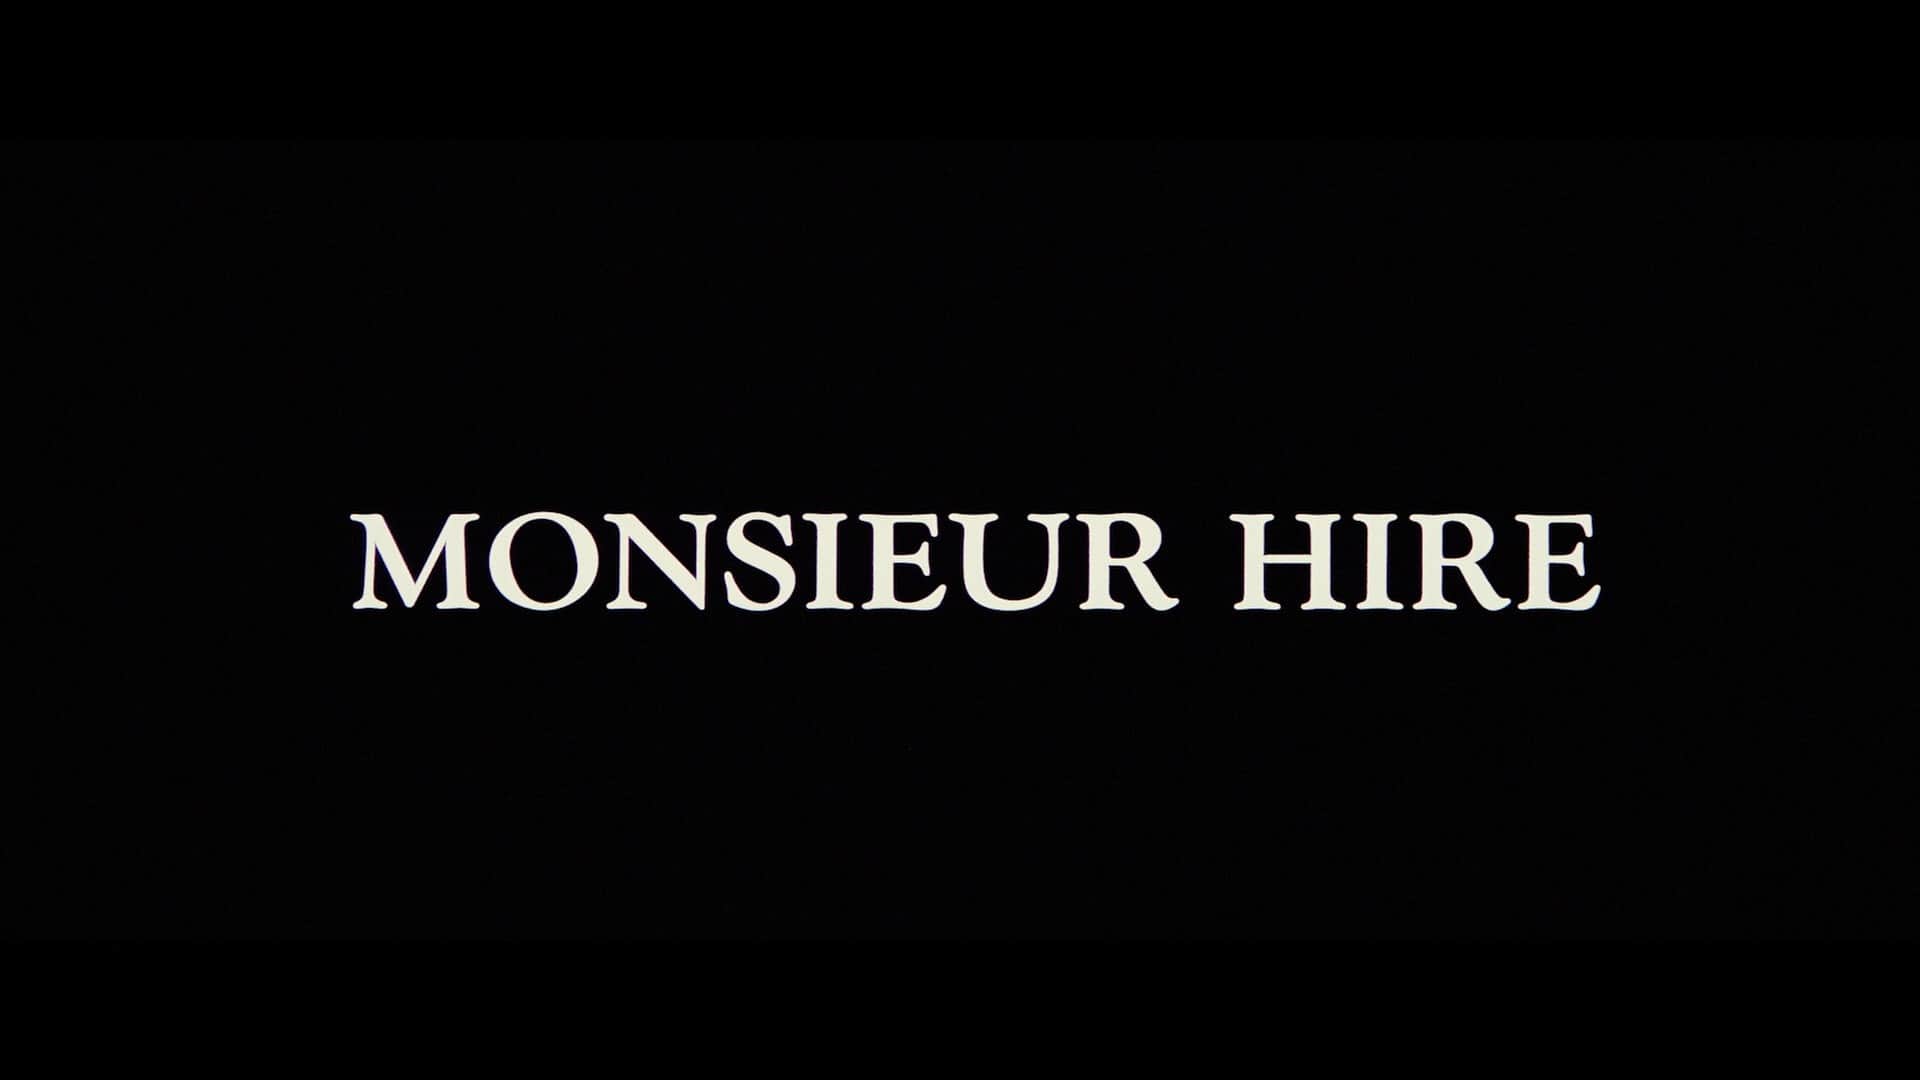 Monsieur Hire (1989) [Cohen Collection Blu-ray review] 66